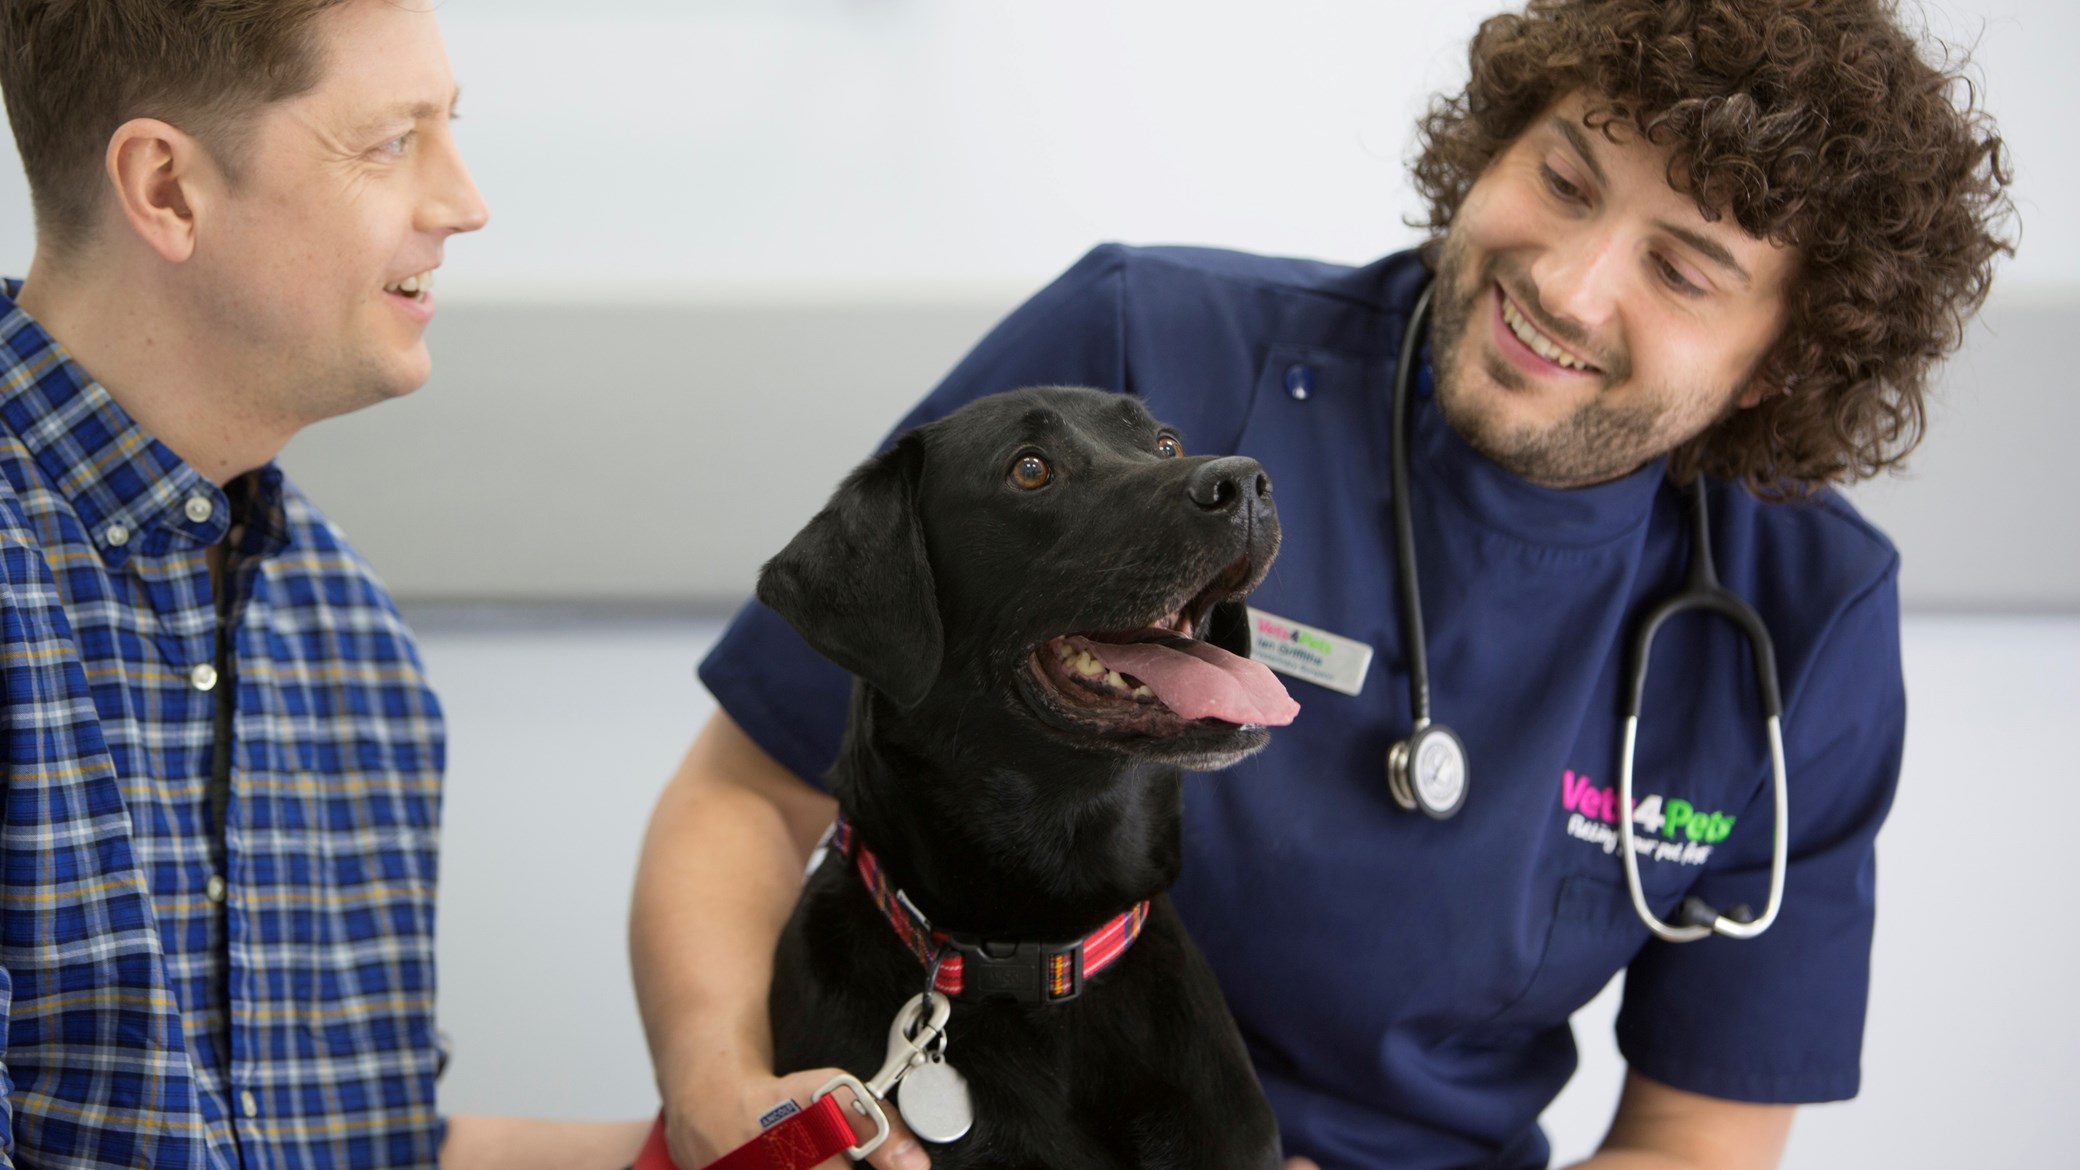 Complete Care for Dogs | Dog Care & Advice | Vets4Pets